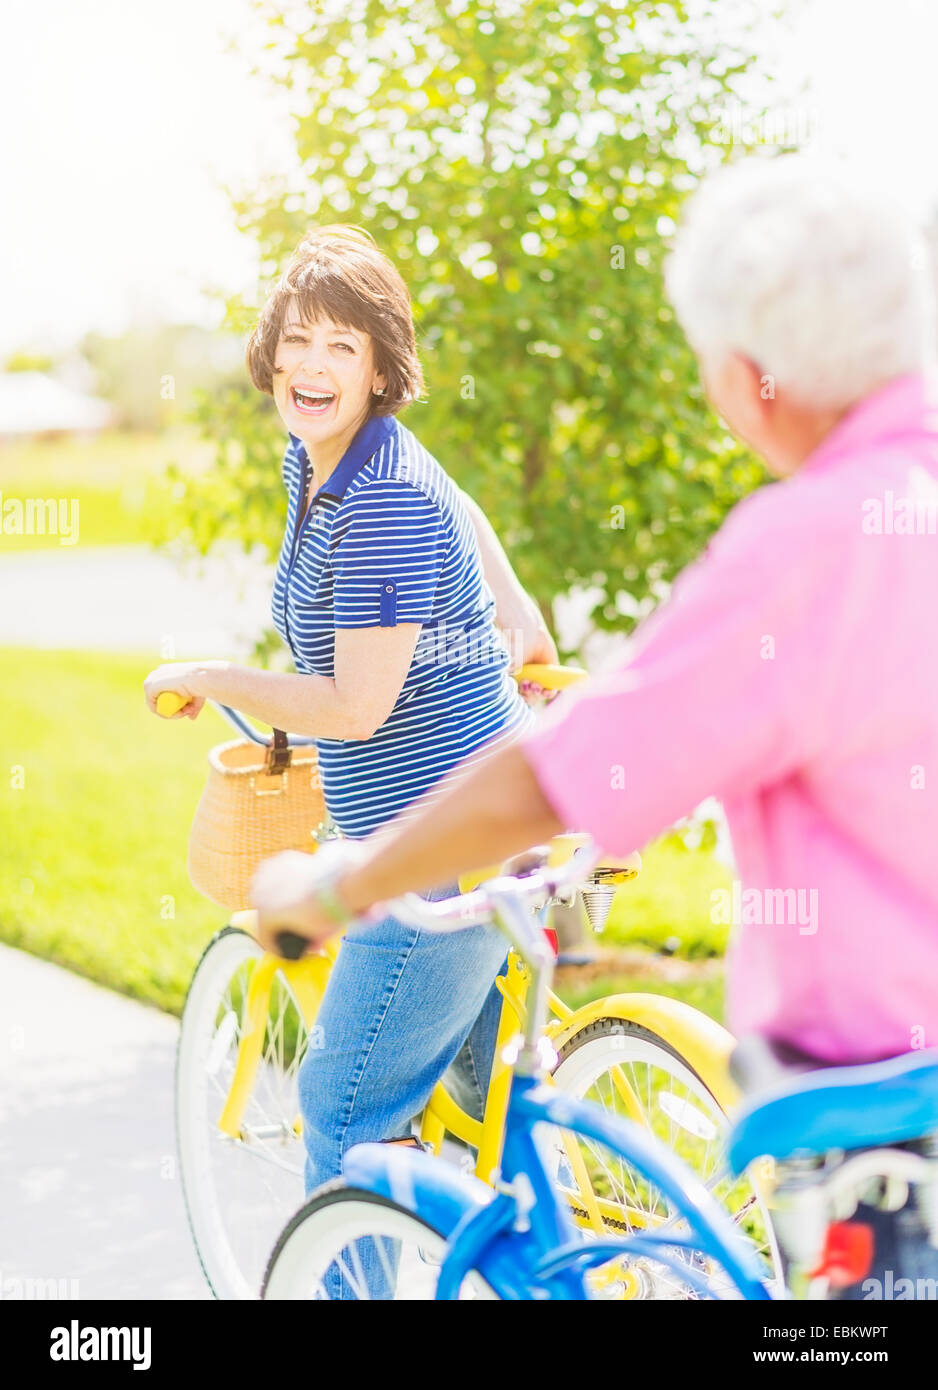 USA, Florida, Jupiter, Portrait of woman looking over shoulder at senior man, while getting on bicycle and laughing Stock Photo